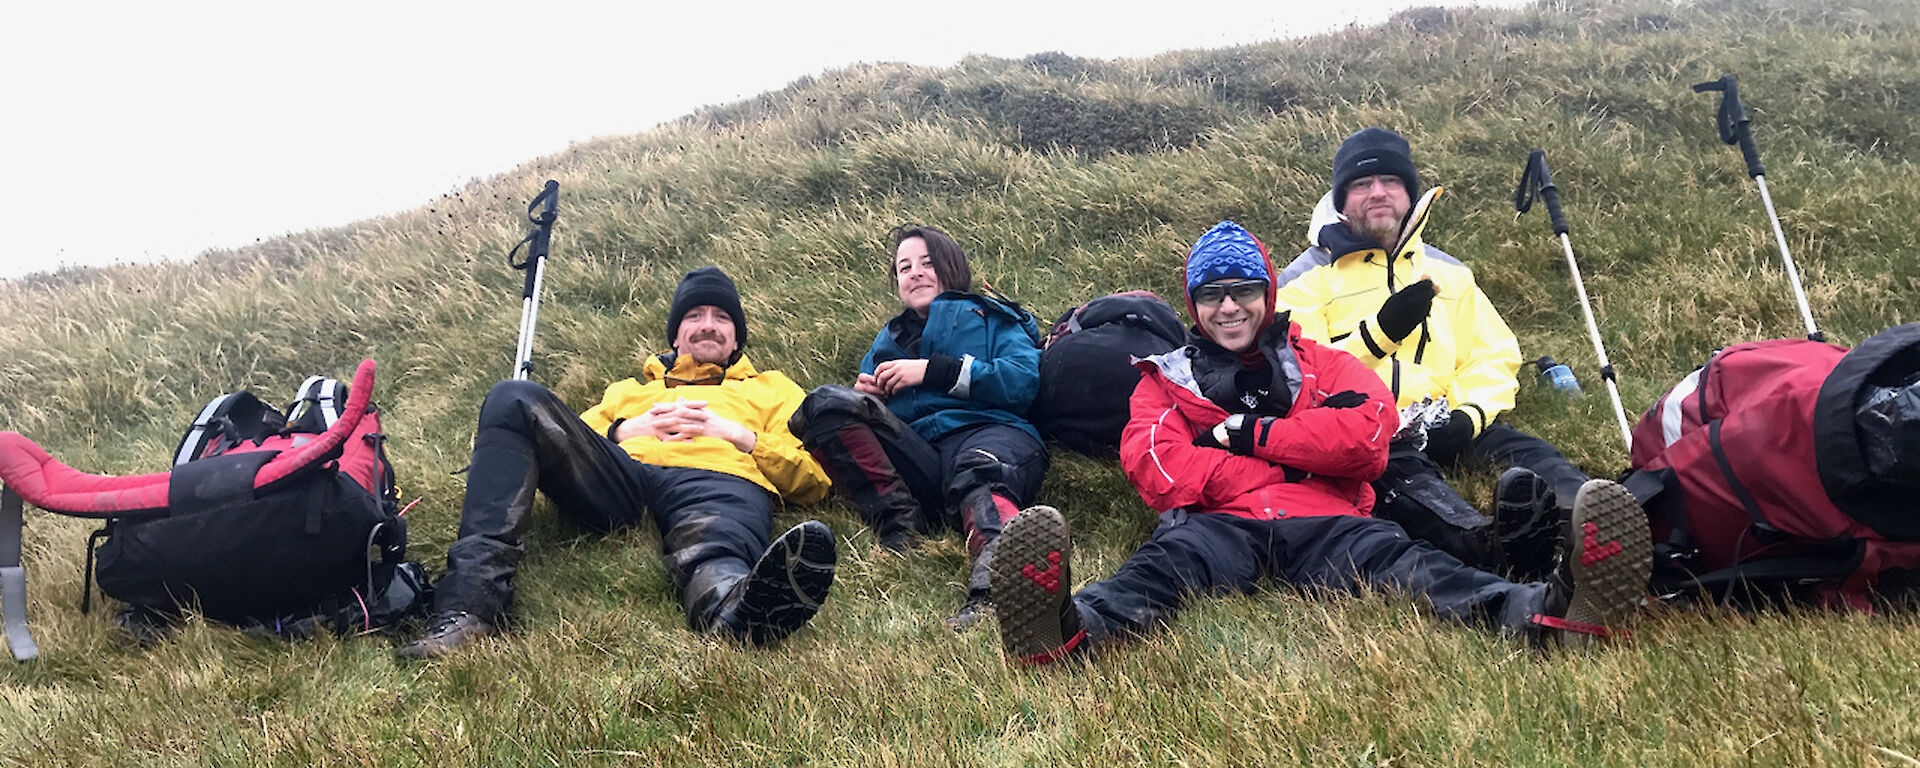 Macquarie Island expeditioners taking a break on the grass and enjoying field training